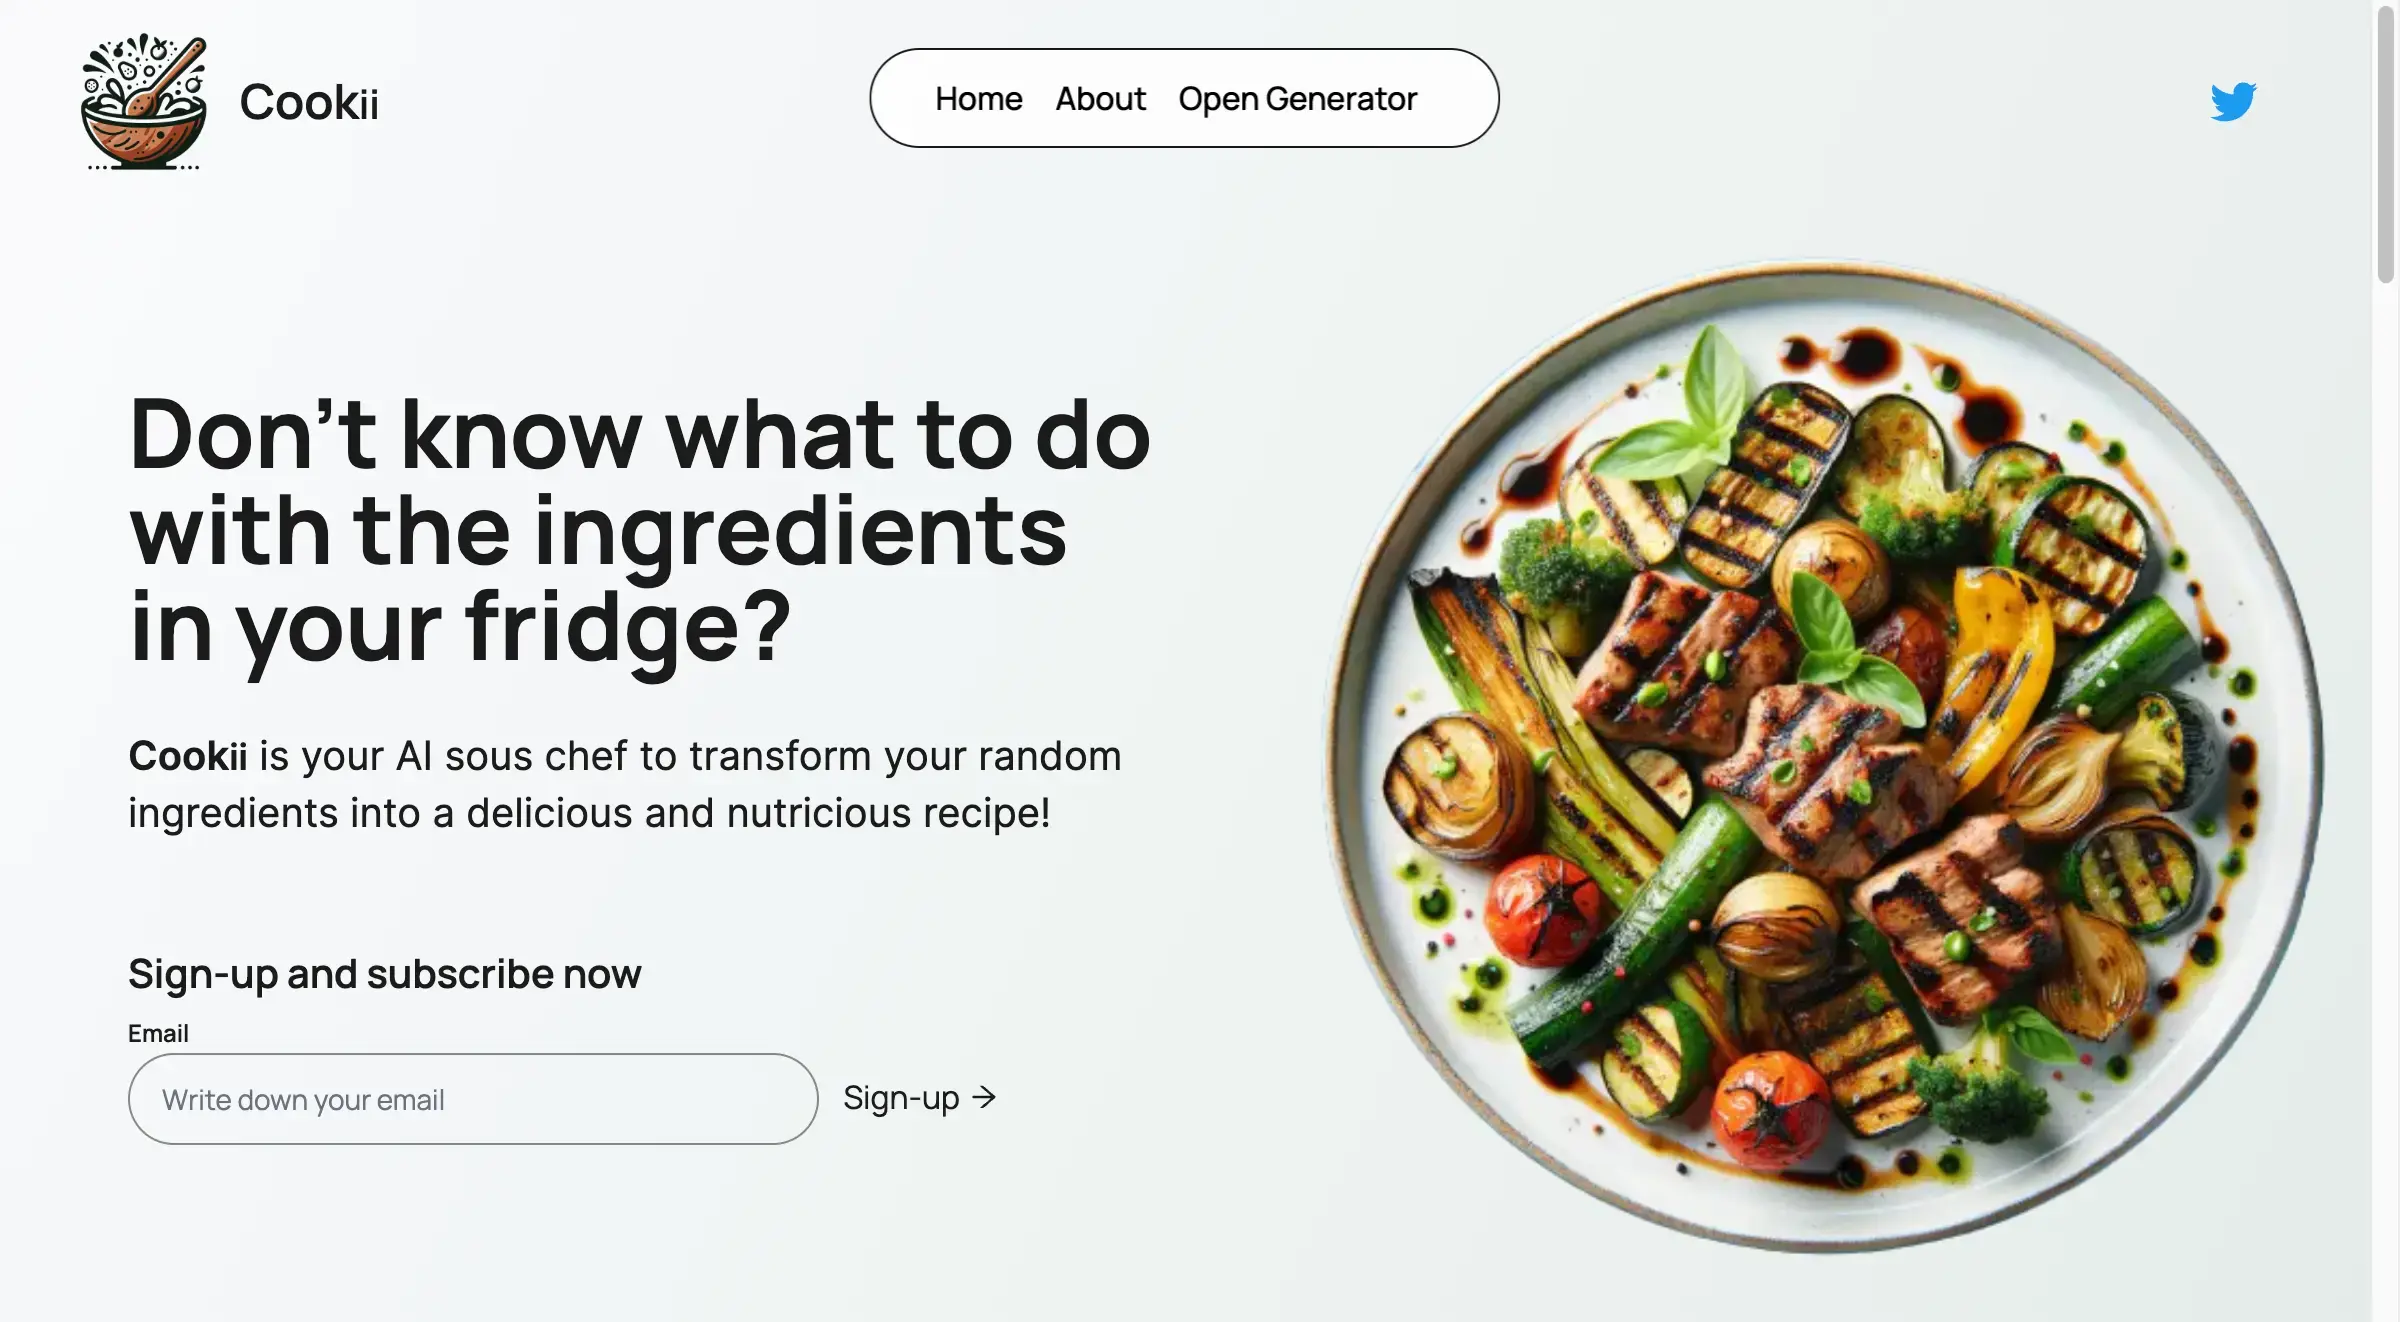 Cookii - Your AI Sous Chef